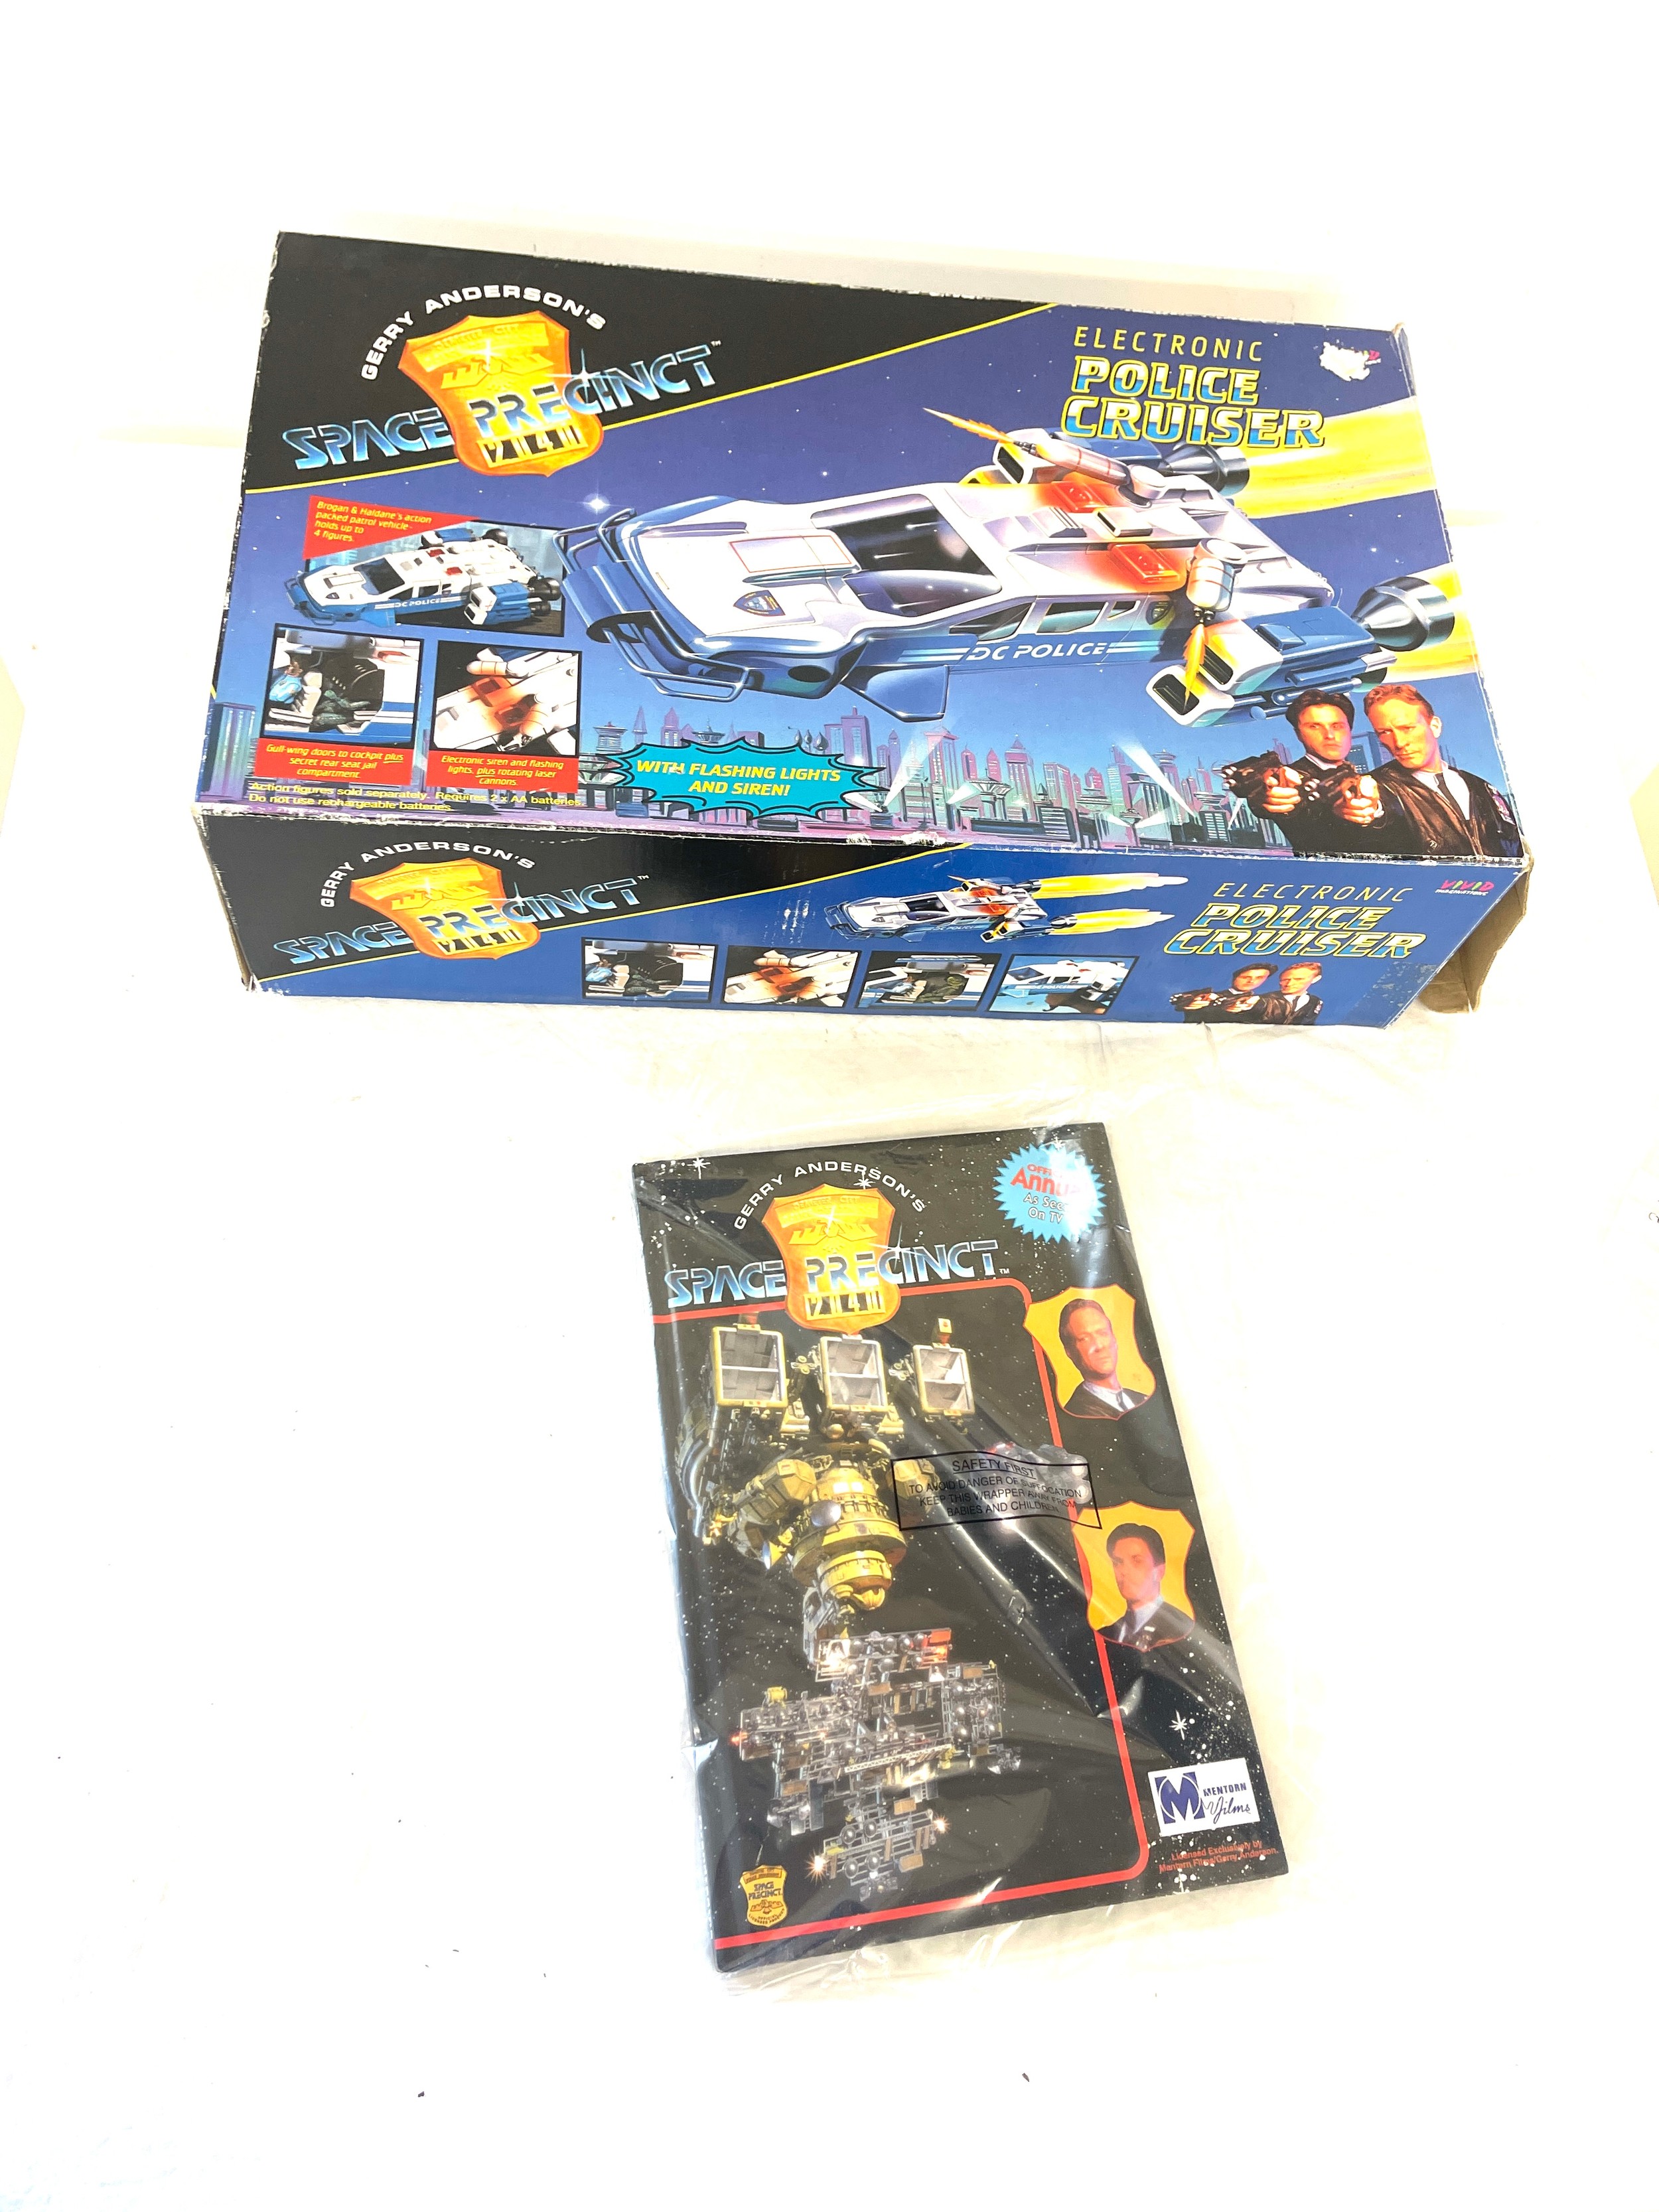 Gerry Anderson Space precinct electronic space police cruiser, annual book